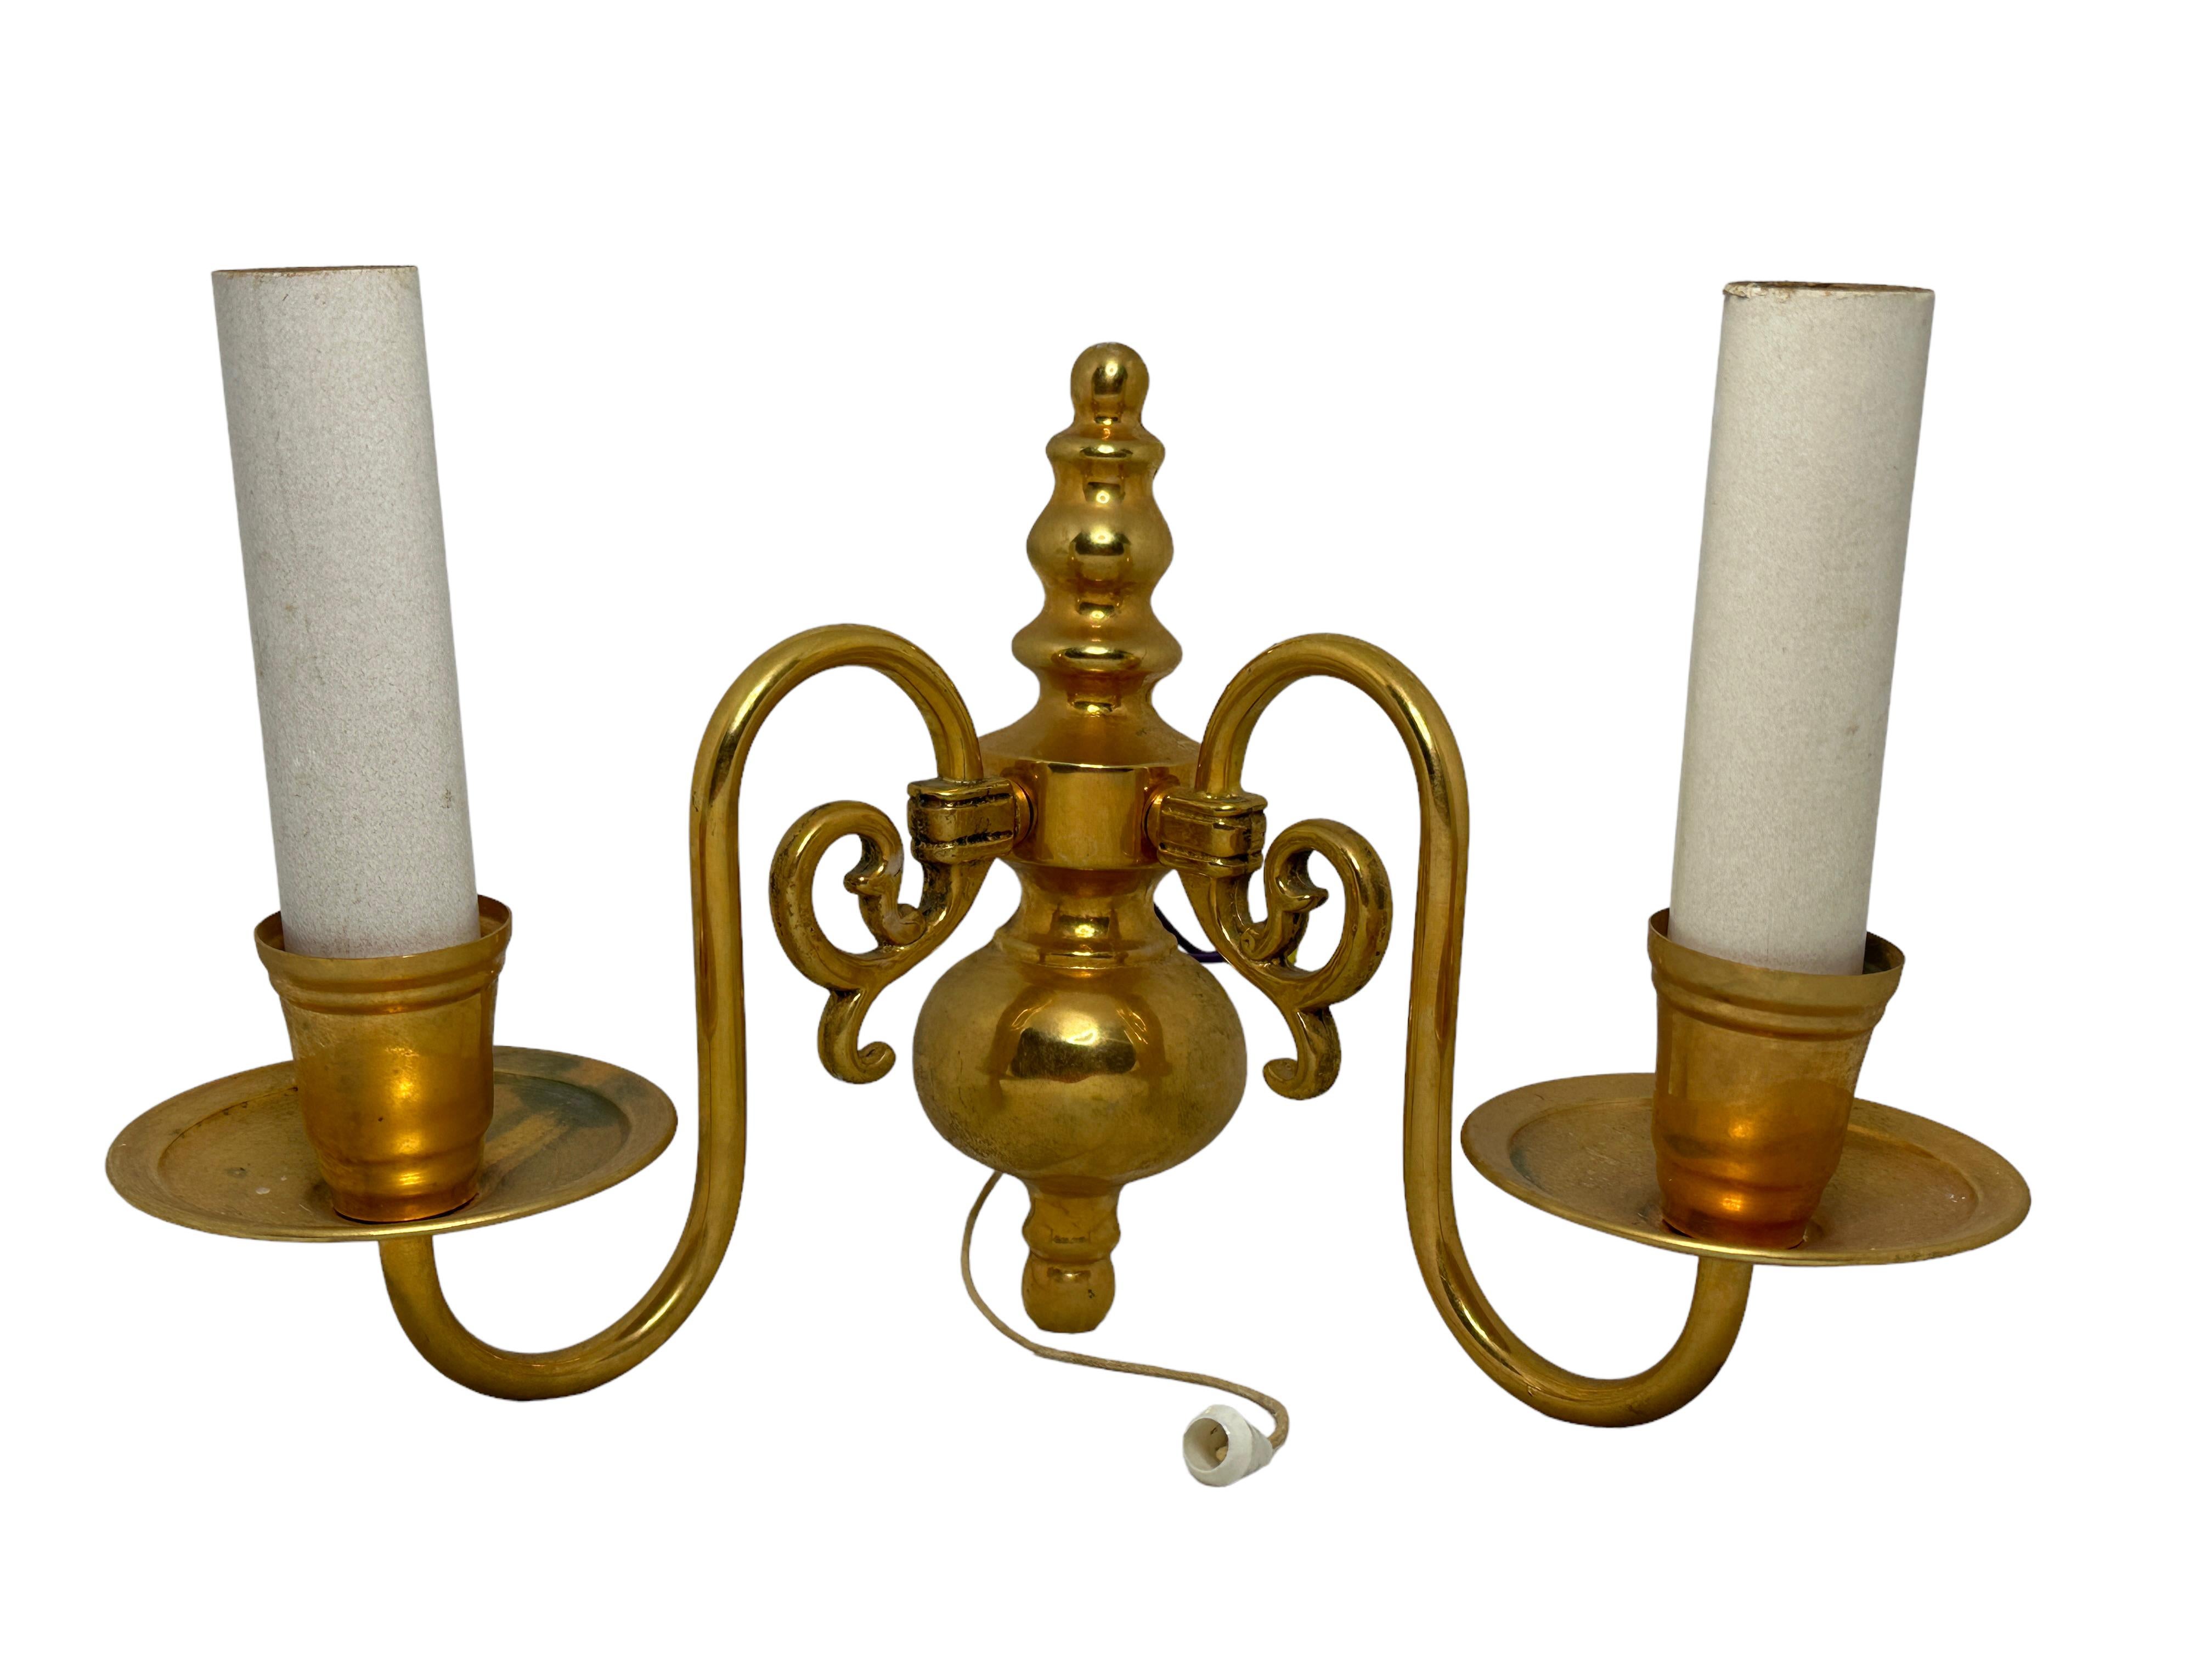 A stunning pair of heavy brass wall sconces. Each consisting of a stylish Farmhouse style design. Each fixture requires two European E14 / 110 Volt candelabra bulbs, each bulb up to 40 watts. Light bulbs are not included in the offer. A nice